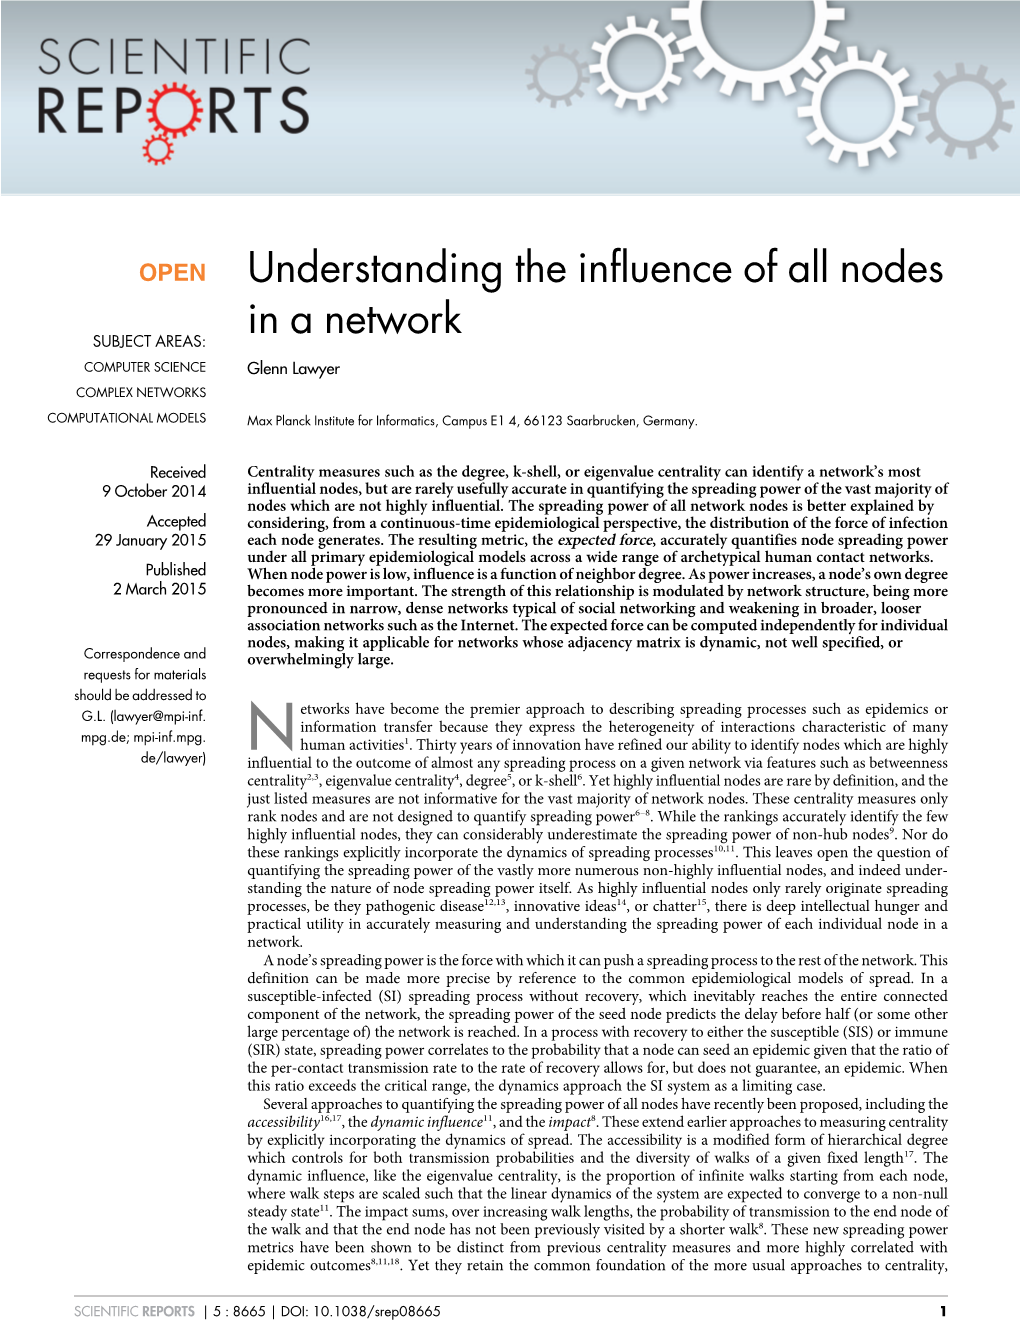 Understanding the Influence of All Nodes in a Network